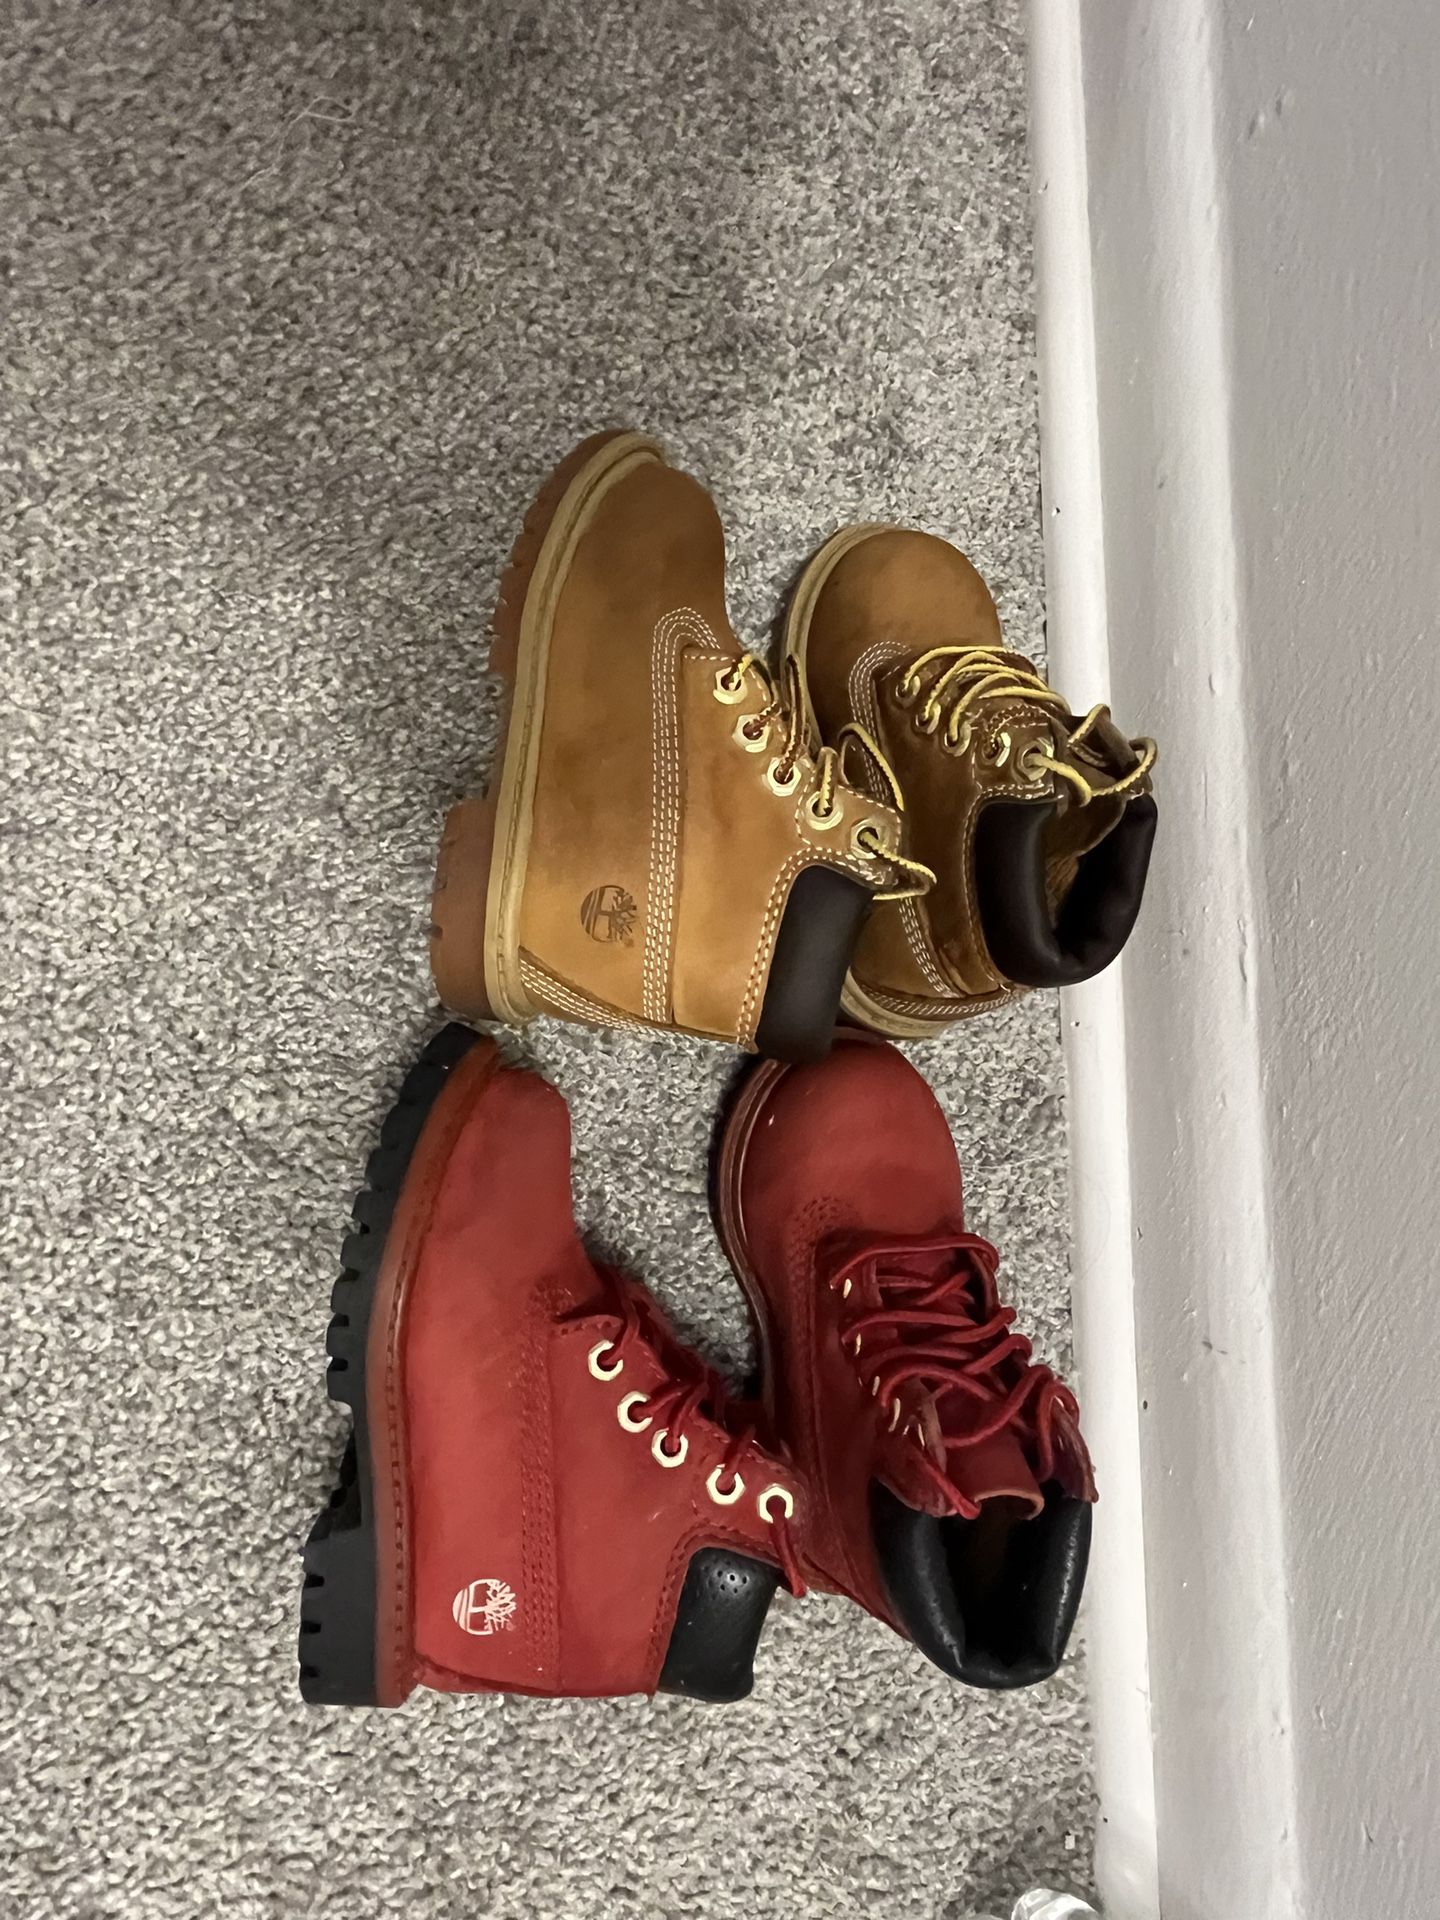 Timberlands boots size 5 Little kids..$45 each Both for $80 